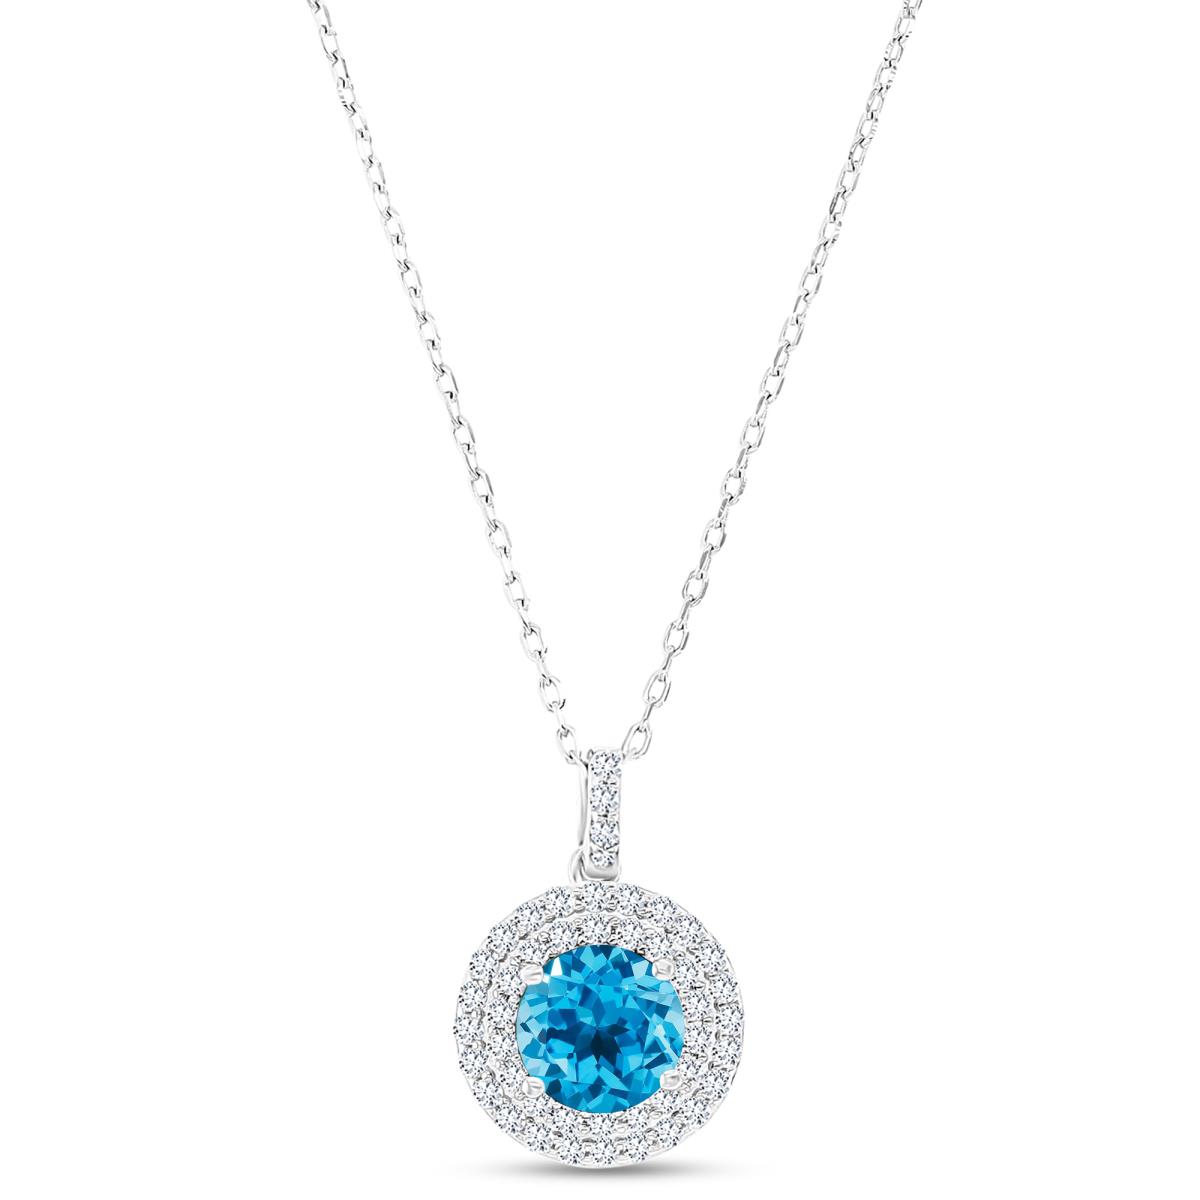 Sterling Silver Rhodium 7mm RD Blue Topaz / Cr White Sapphire Duble Halo 16"+2" Necklace